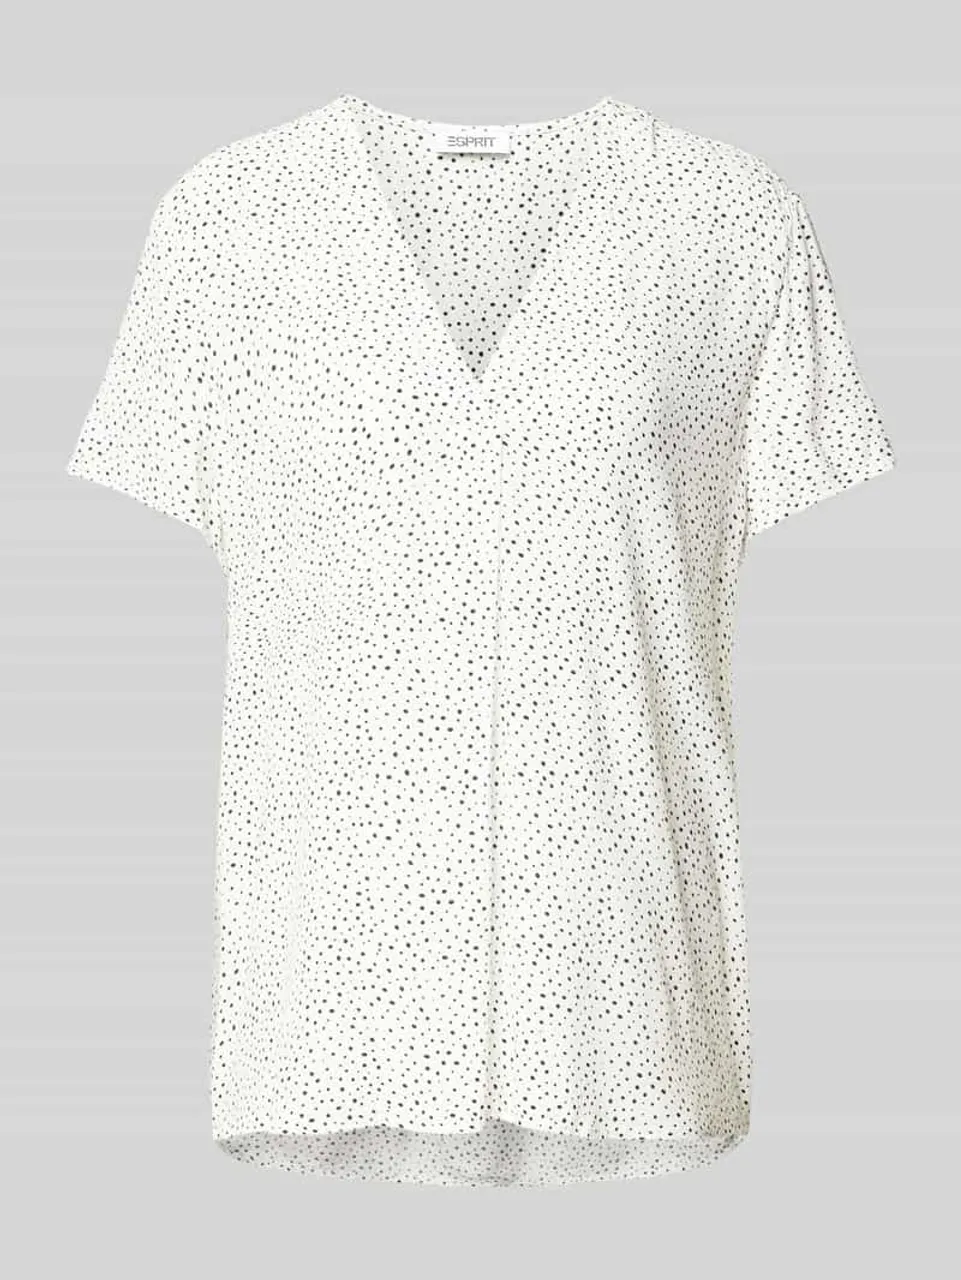 Esprit Bluse mit Allover-Muster in Offwhite